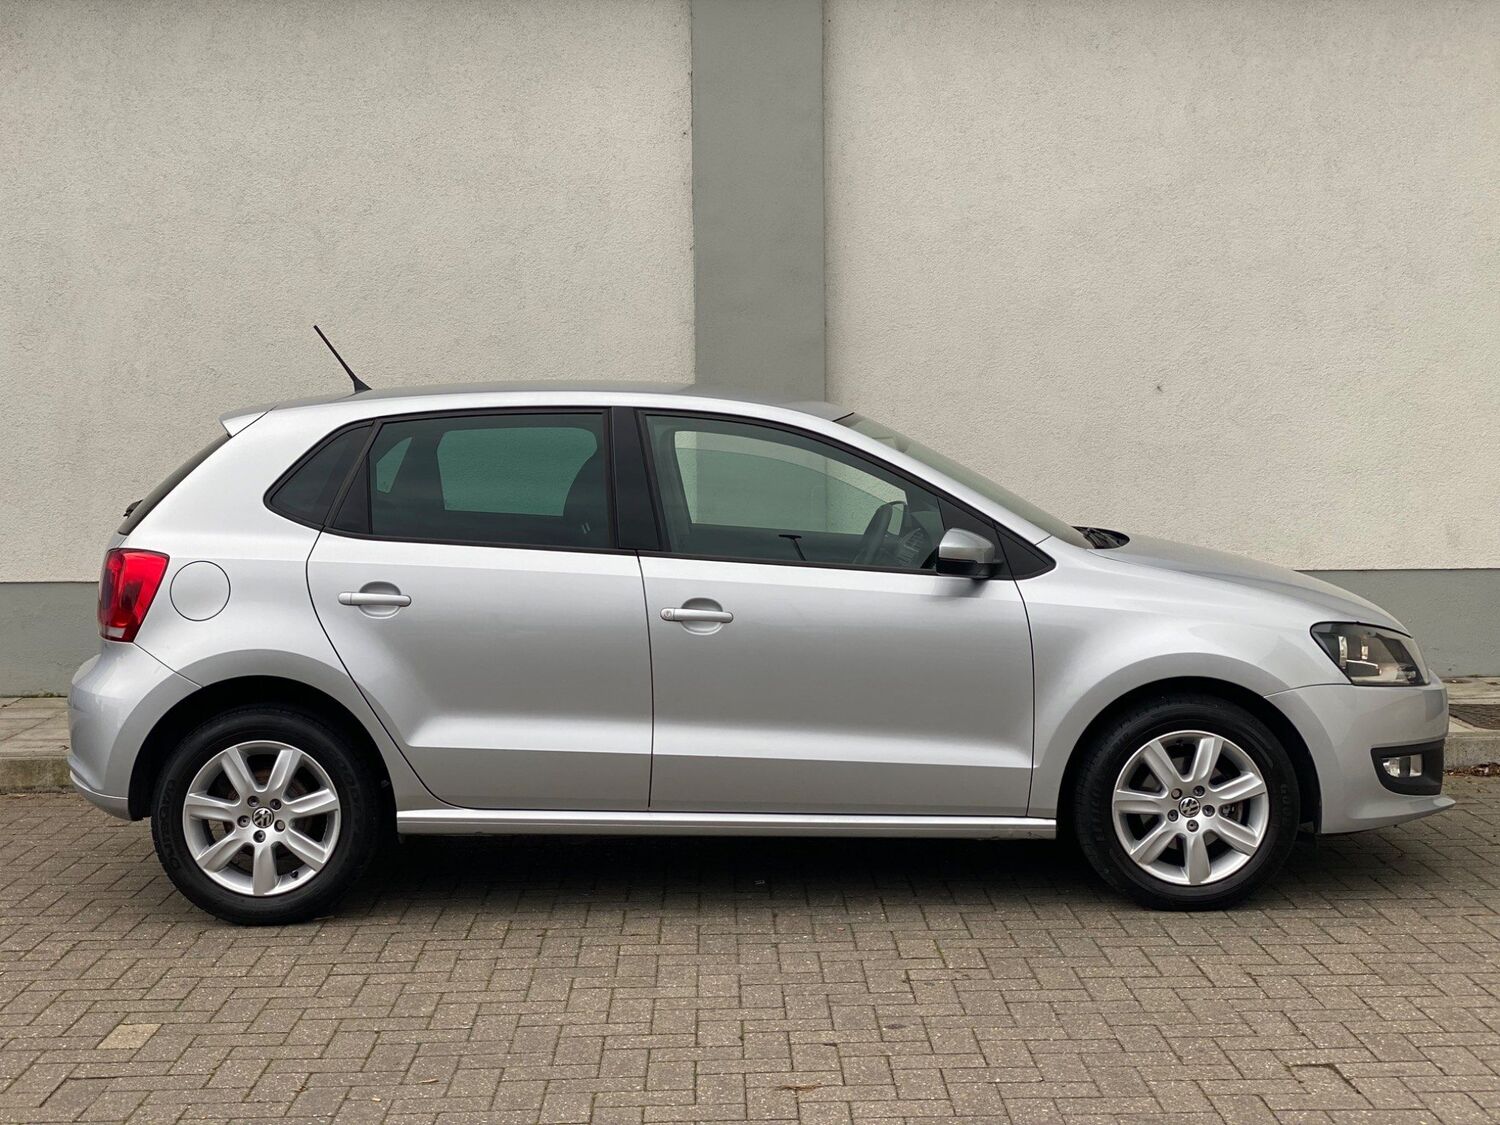 Used VOLKSWAGEN POLO in Ashby de la Zouch, Leicestershire